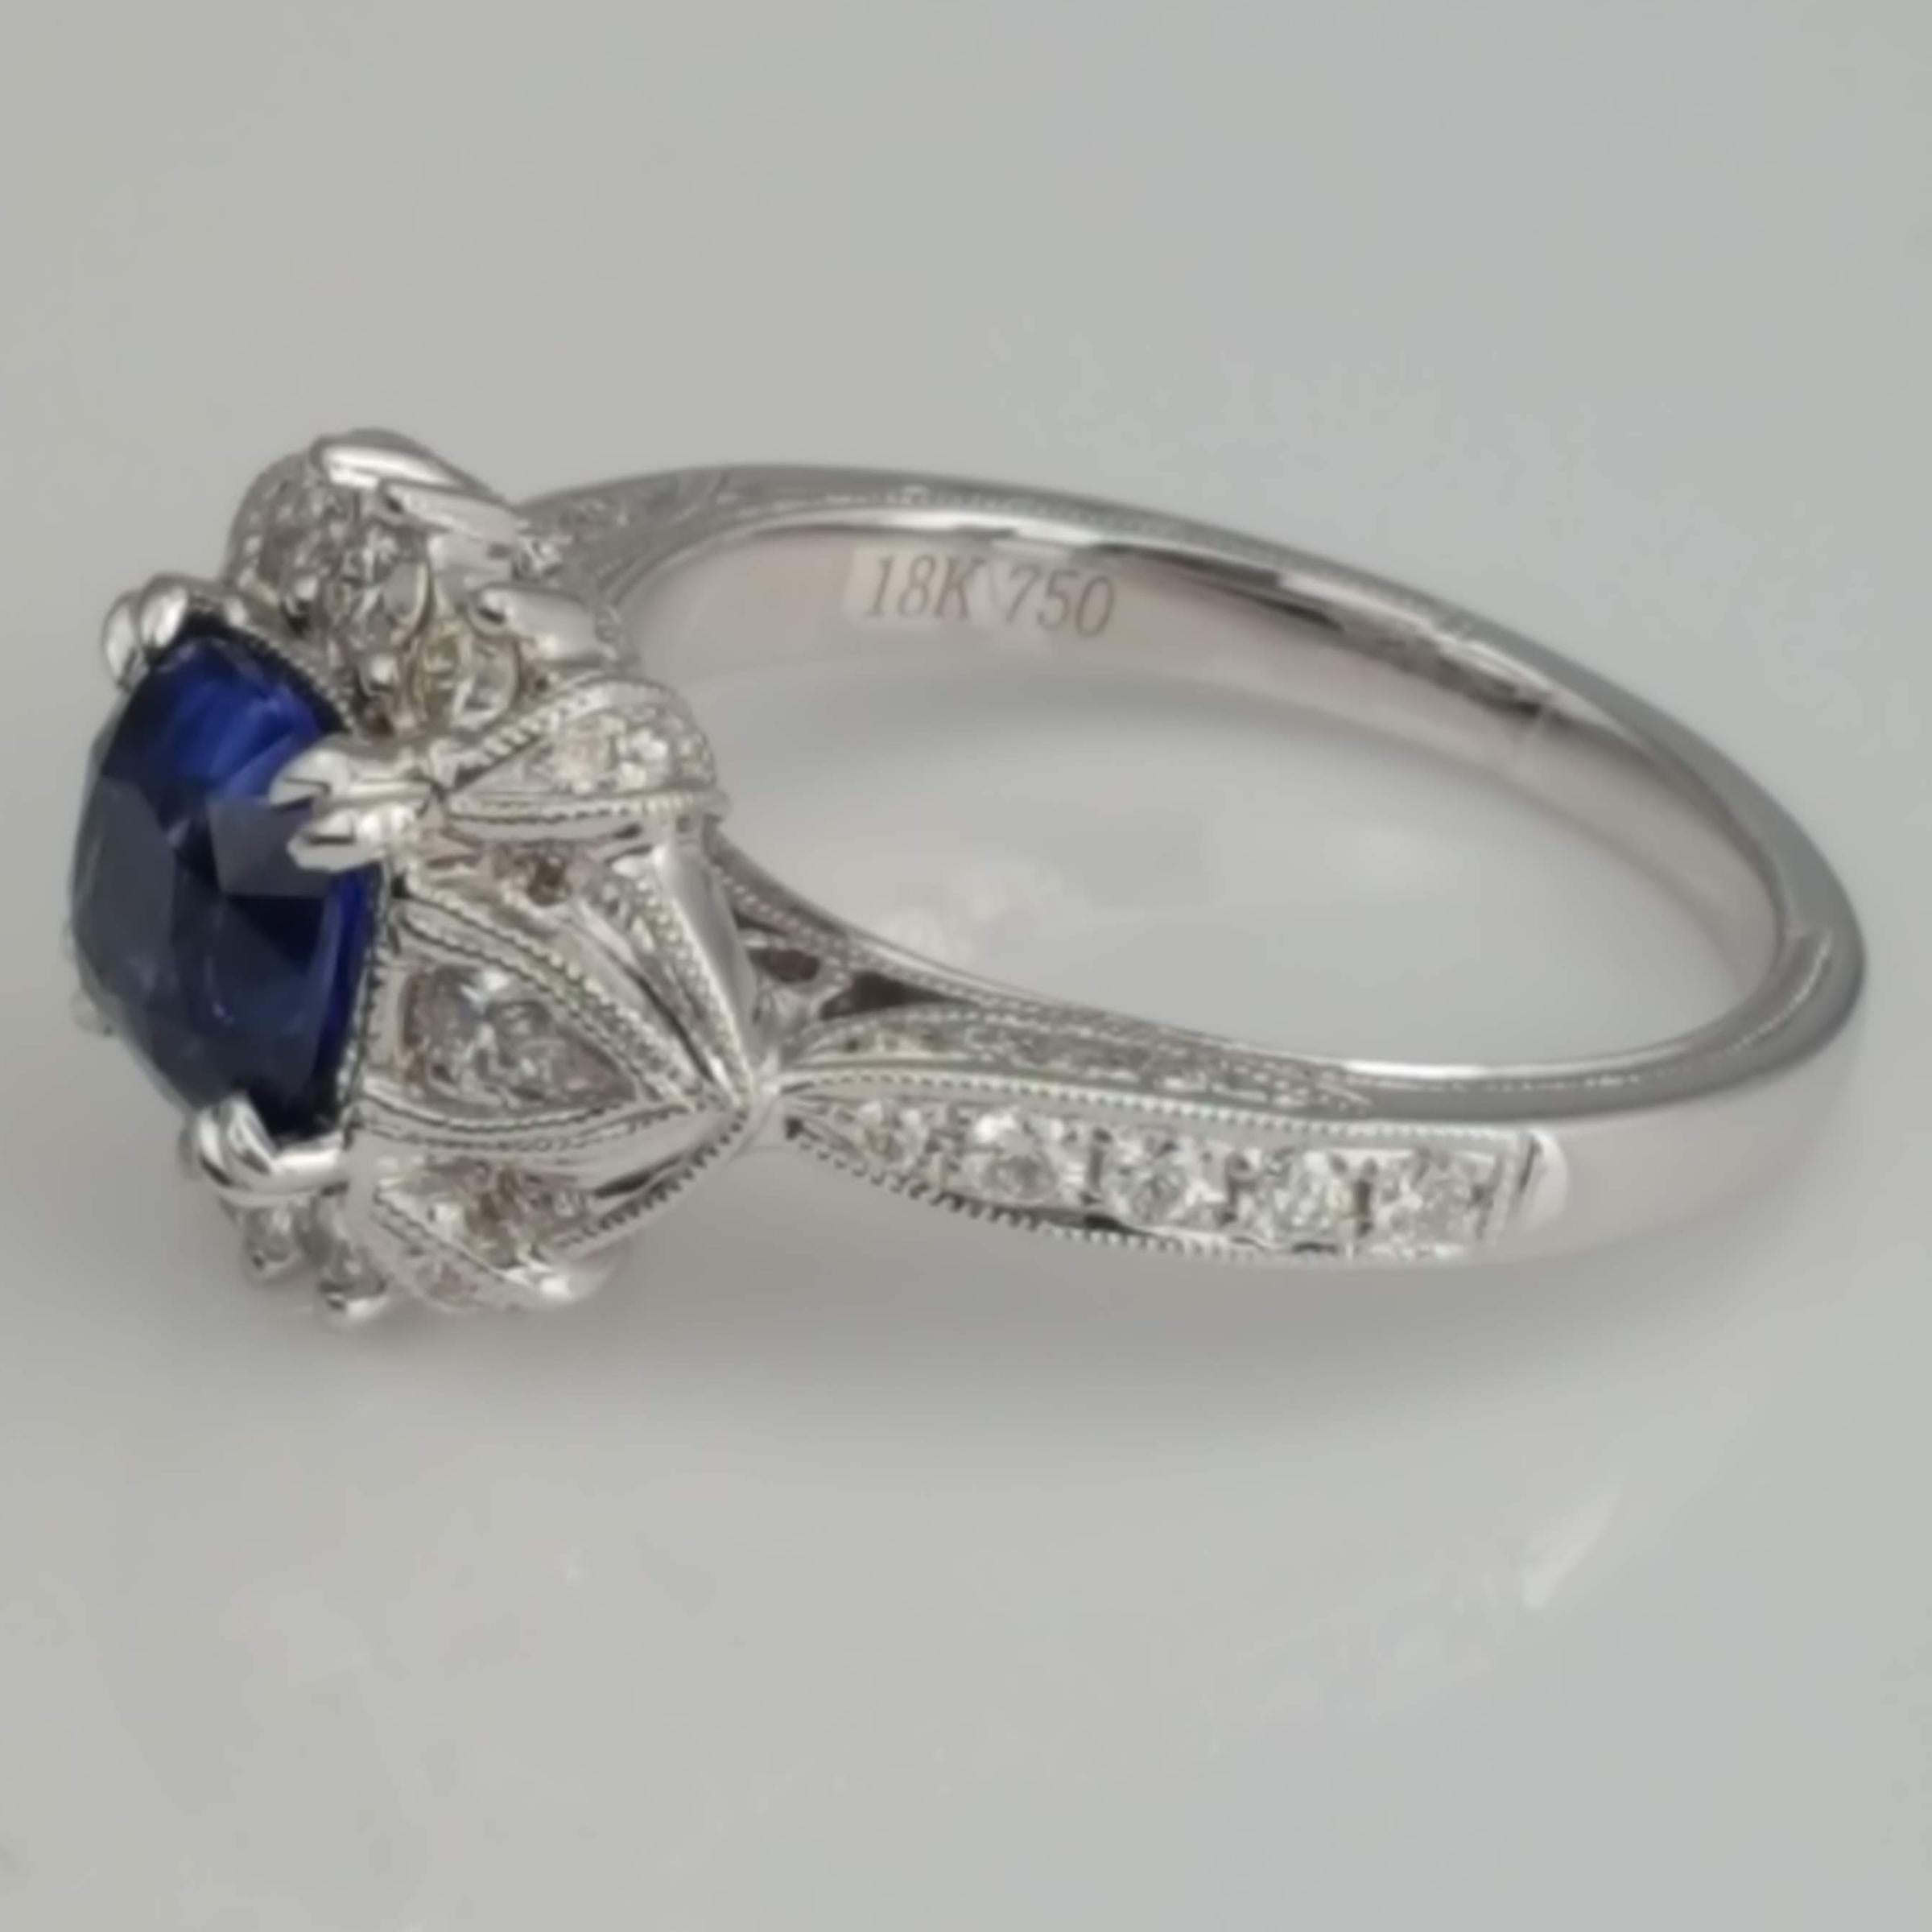 This gorgeous ring holds a 1.60 carat cushion cut blue sapphire center, set among 0.63 carats pear shape and round diamonds. Hand engraved milgrain work and old world design elements bring a classic elegance to this piece.

Center: 1.60 carats